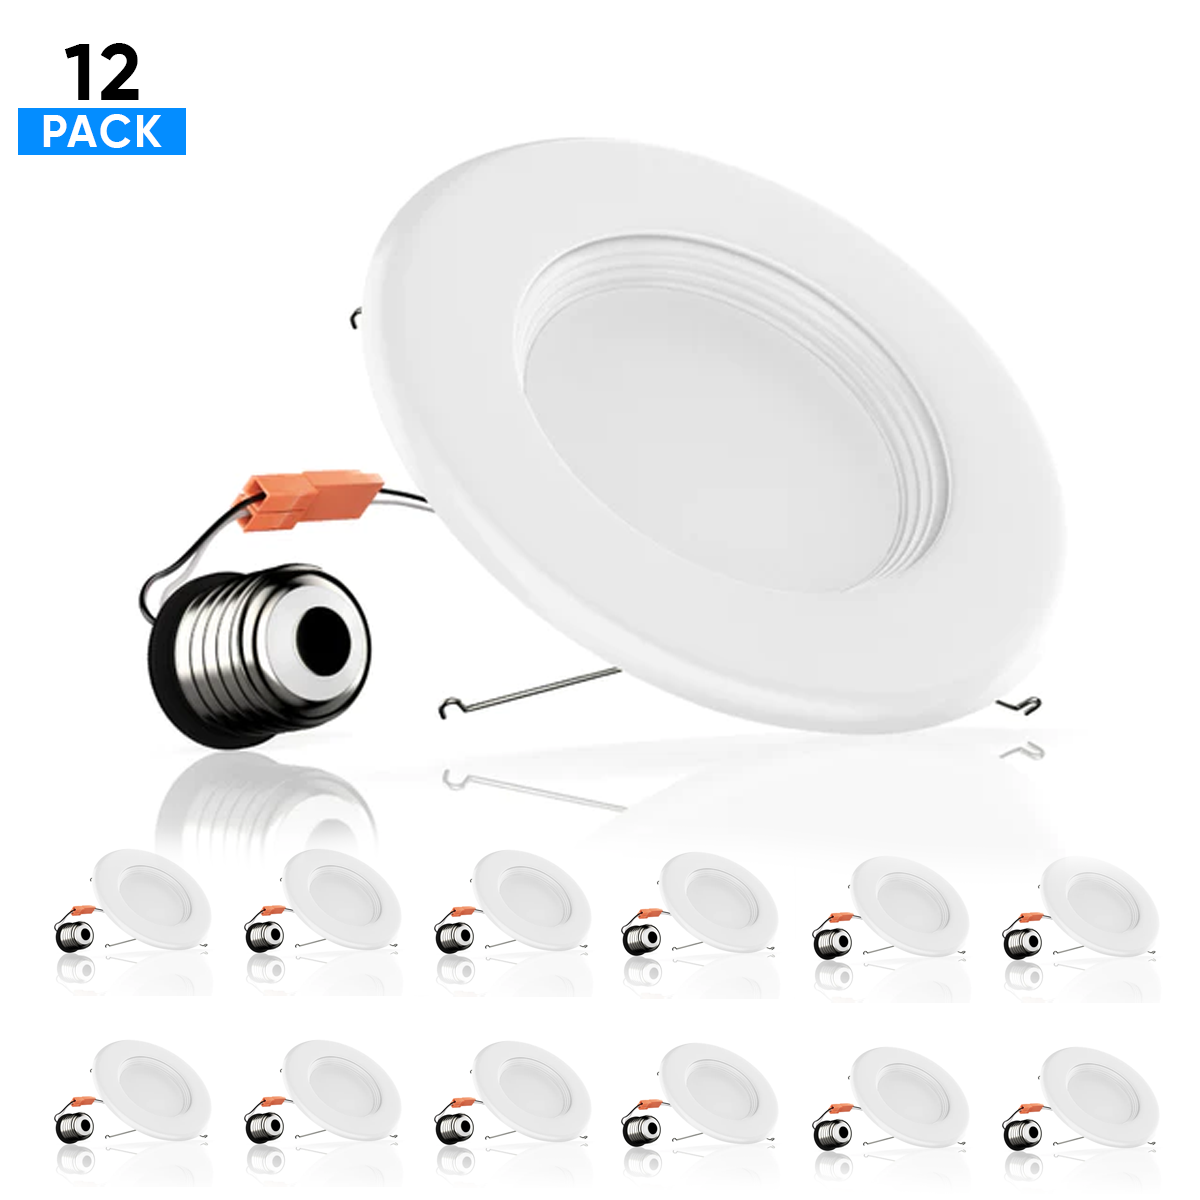 5in. and 6in. Recessed LED Downlight, 15W, 1100LM, Baffle-trim, Dimmable, Energy Star & ETL, Easy Retrofit Installation, LED Can Lights